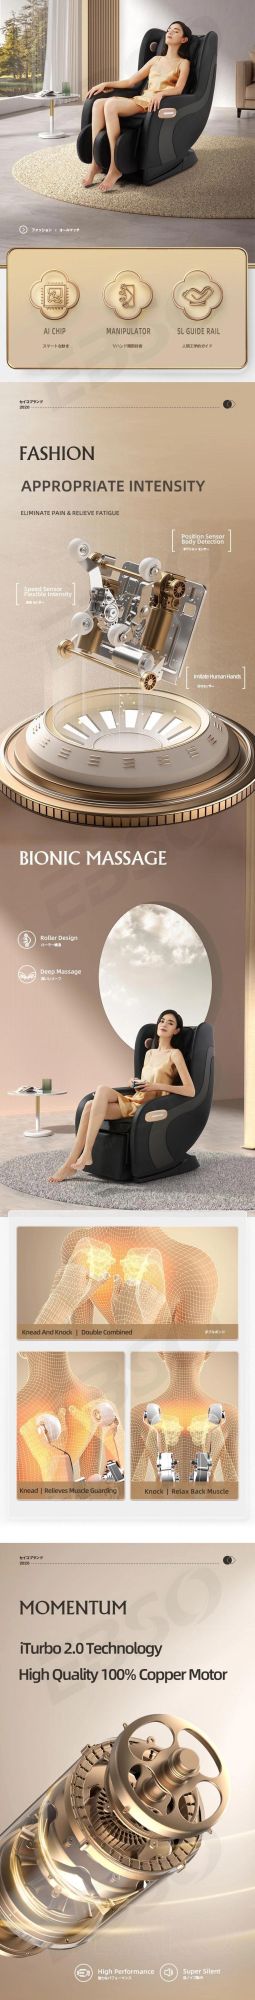 Food Quality Electric Shiatsu Massage Chair Full Body Chair Massage Home with 6 Massage Techniques